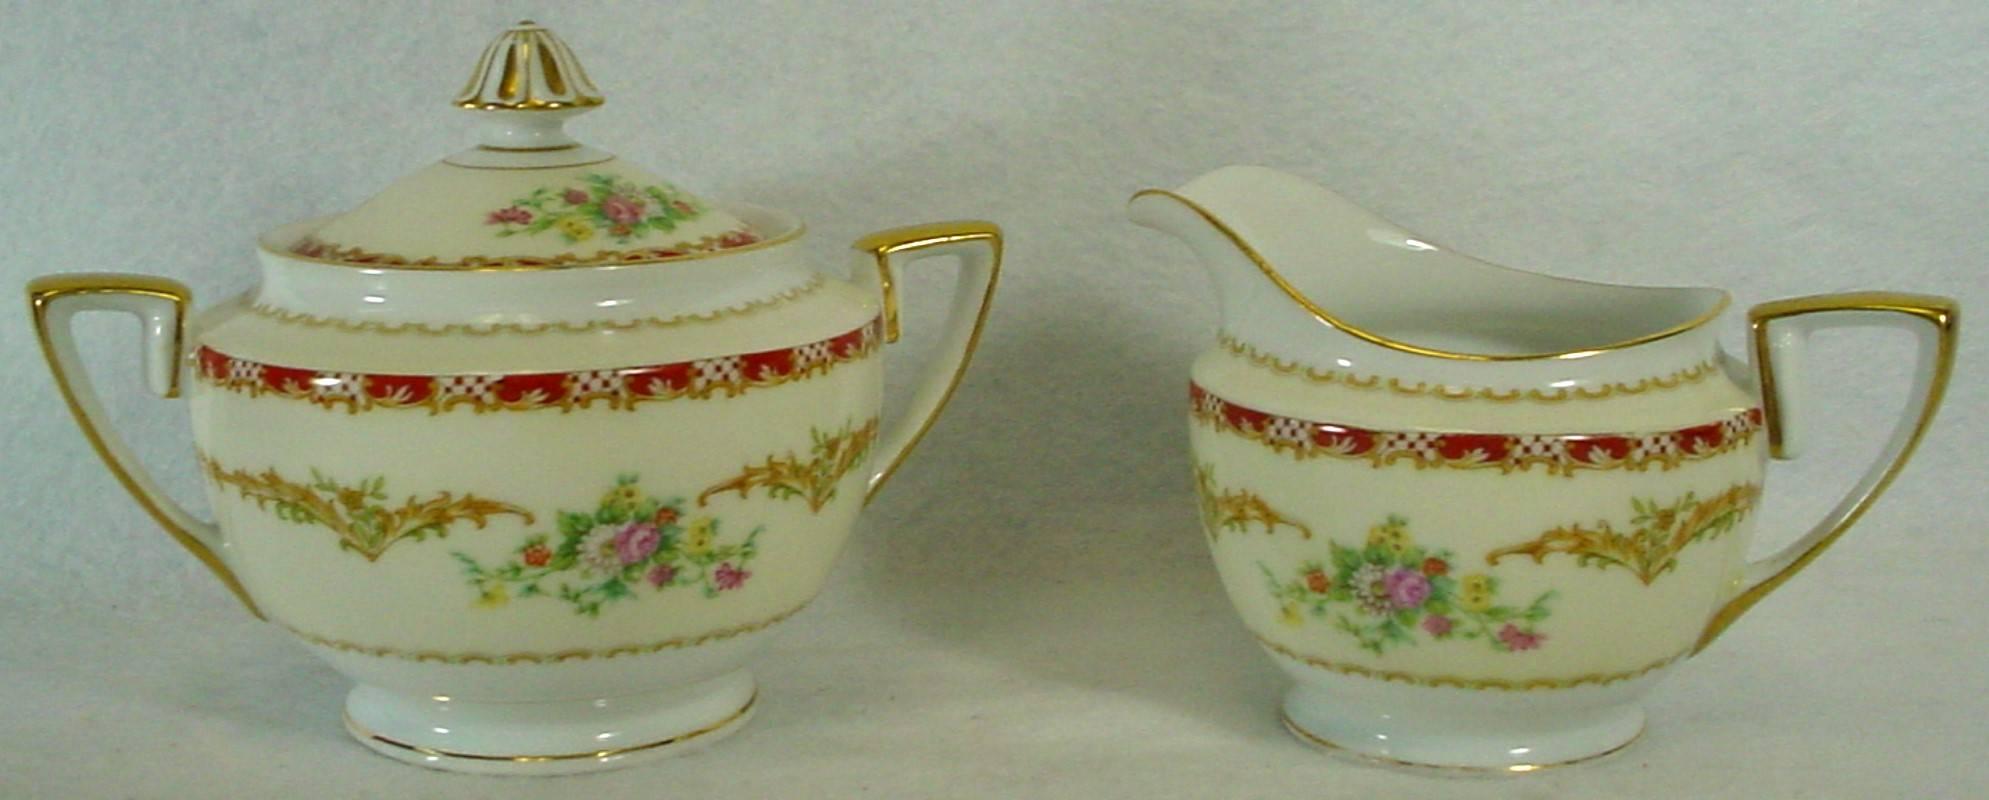 Noritake China Claudette 594 Pattern Five-Piece Hostess Serving Set In Excellent Condition For Sale In St. Petersburg, FL